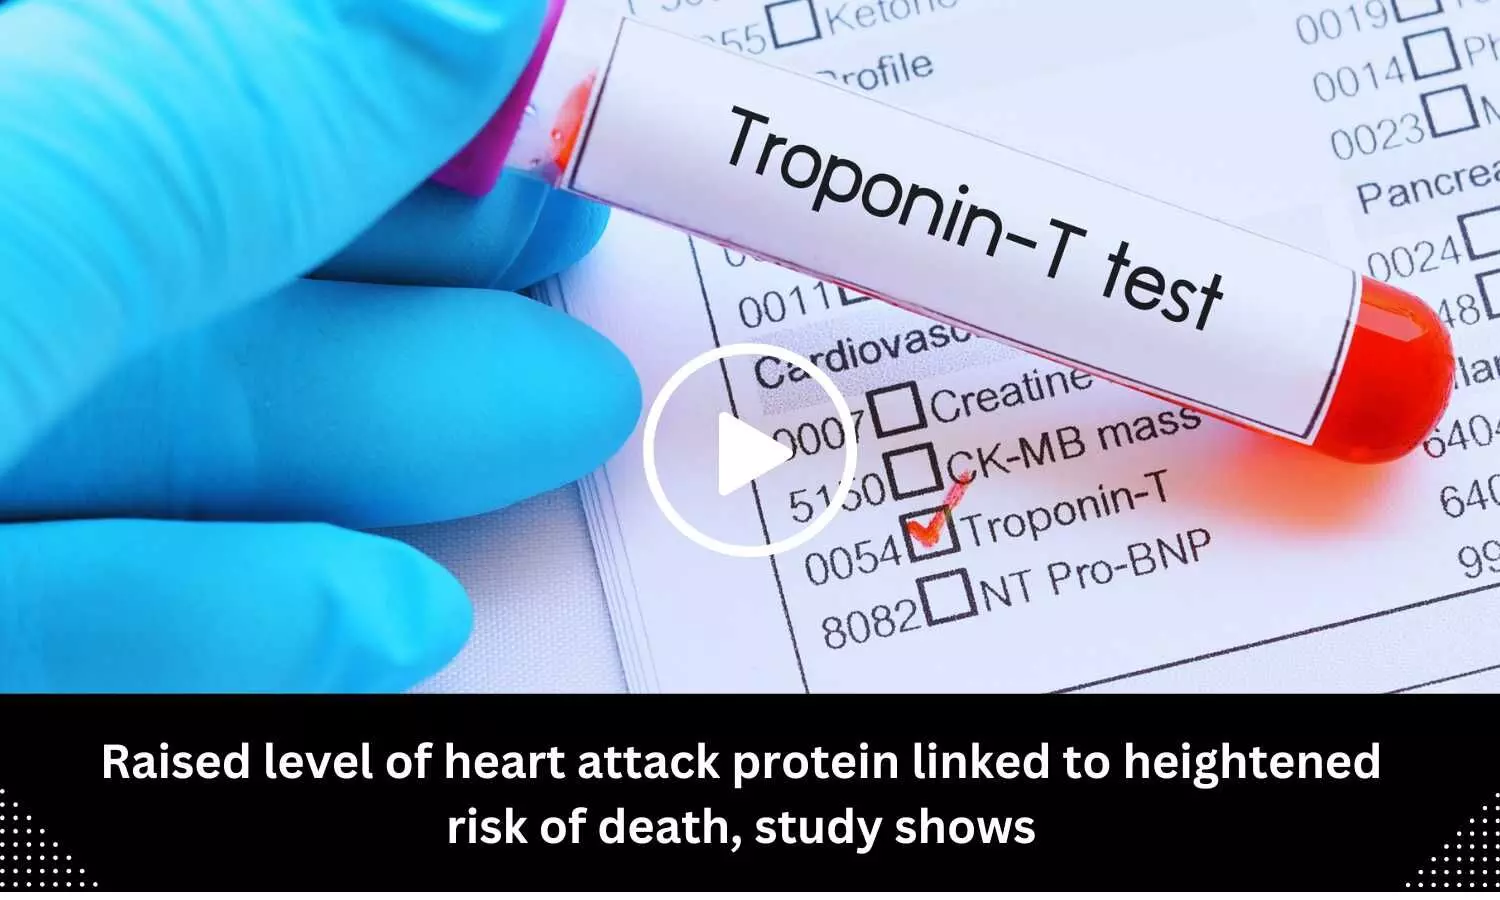 Raised level of heart attack protein linked to heightened risk of death, study shows